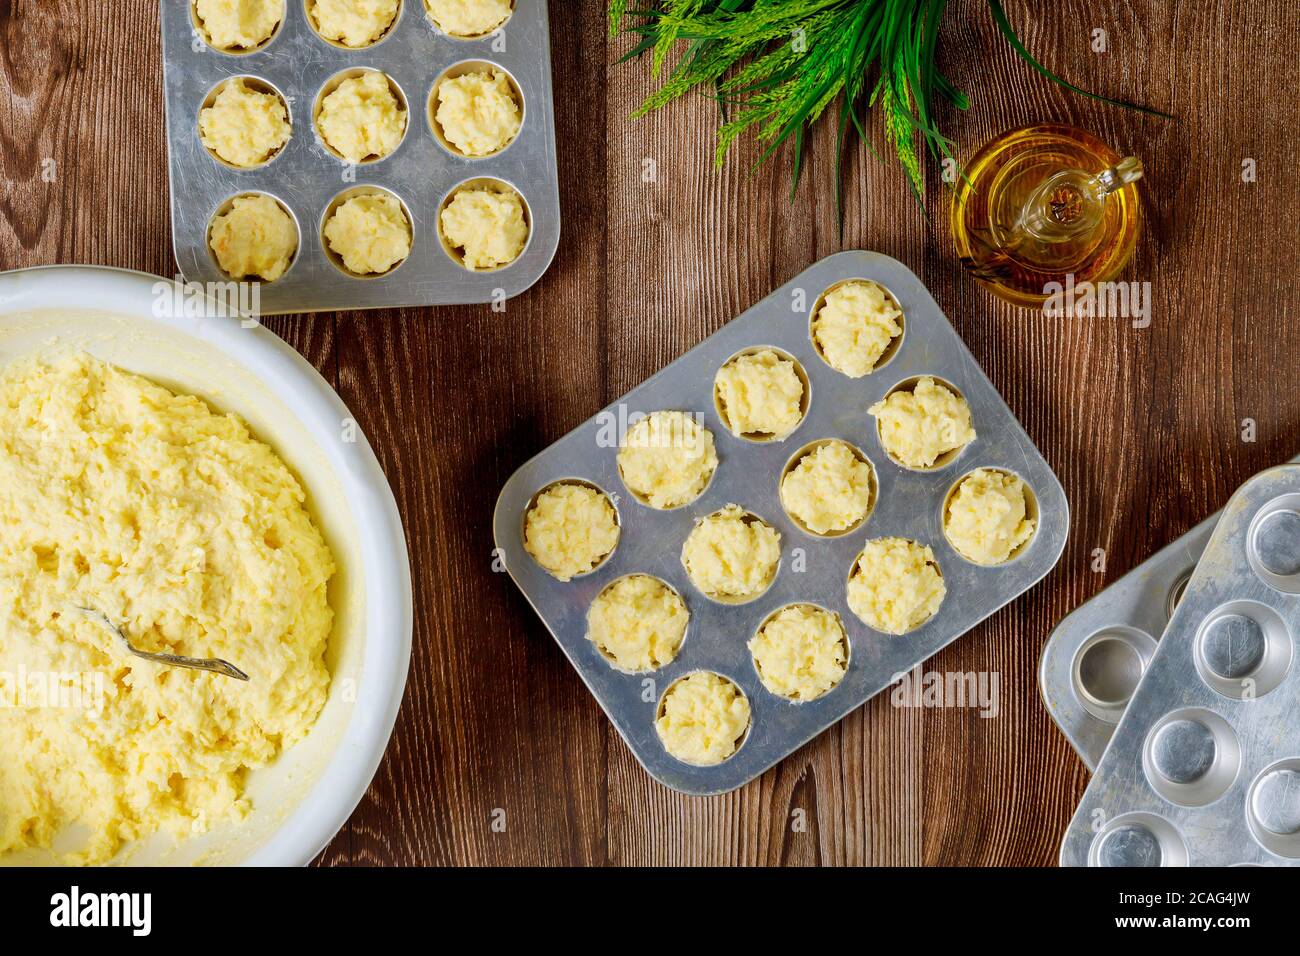 Making dough for baking cheese bread called chipa. Cuisine of Paraguay. Stock Photo